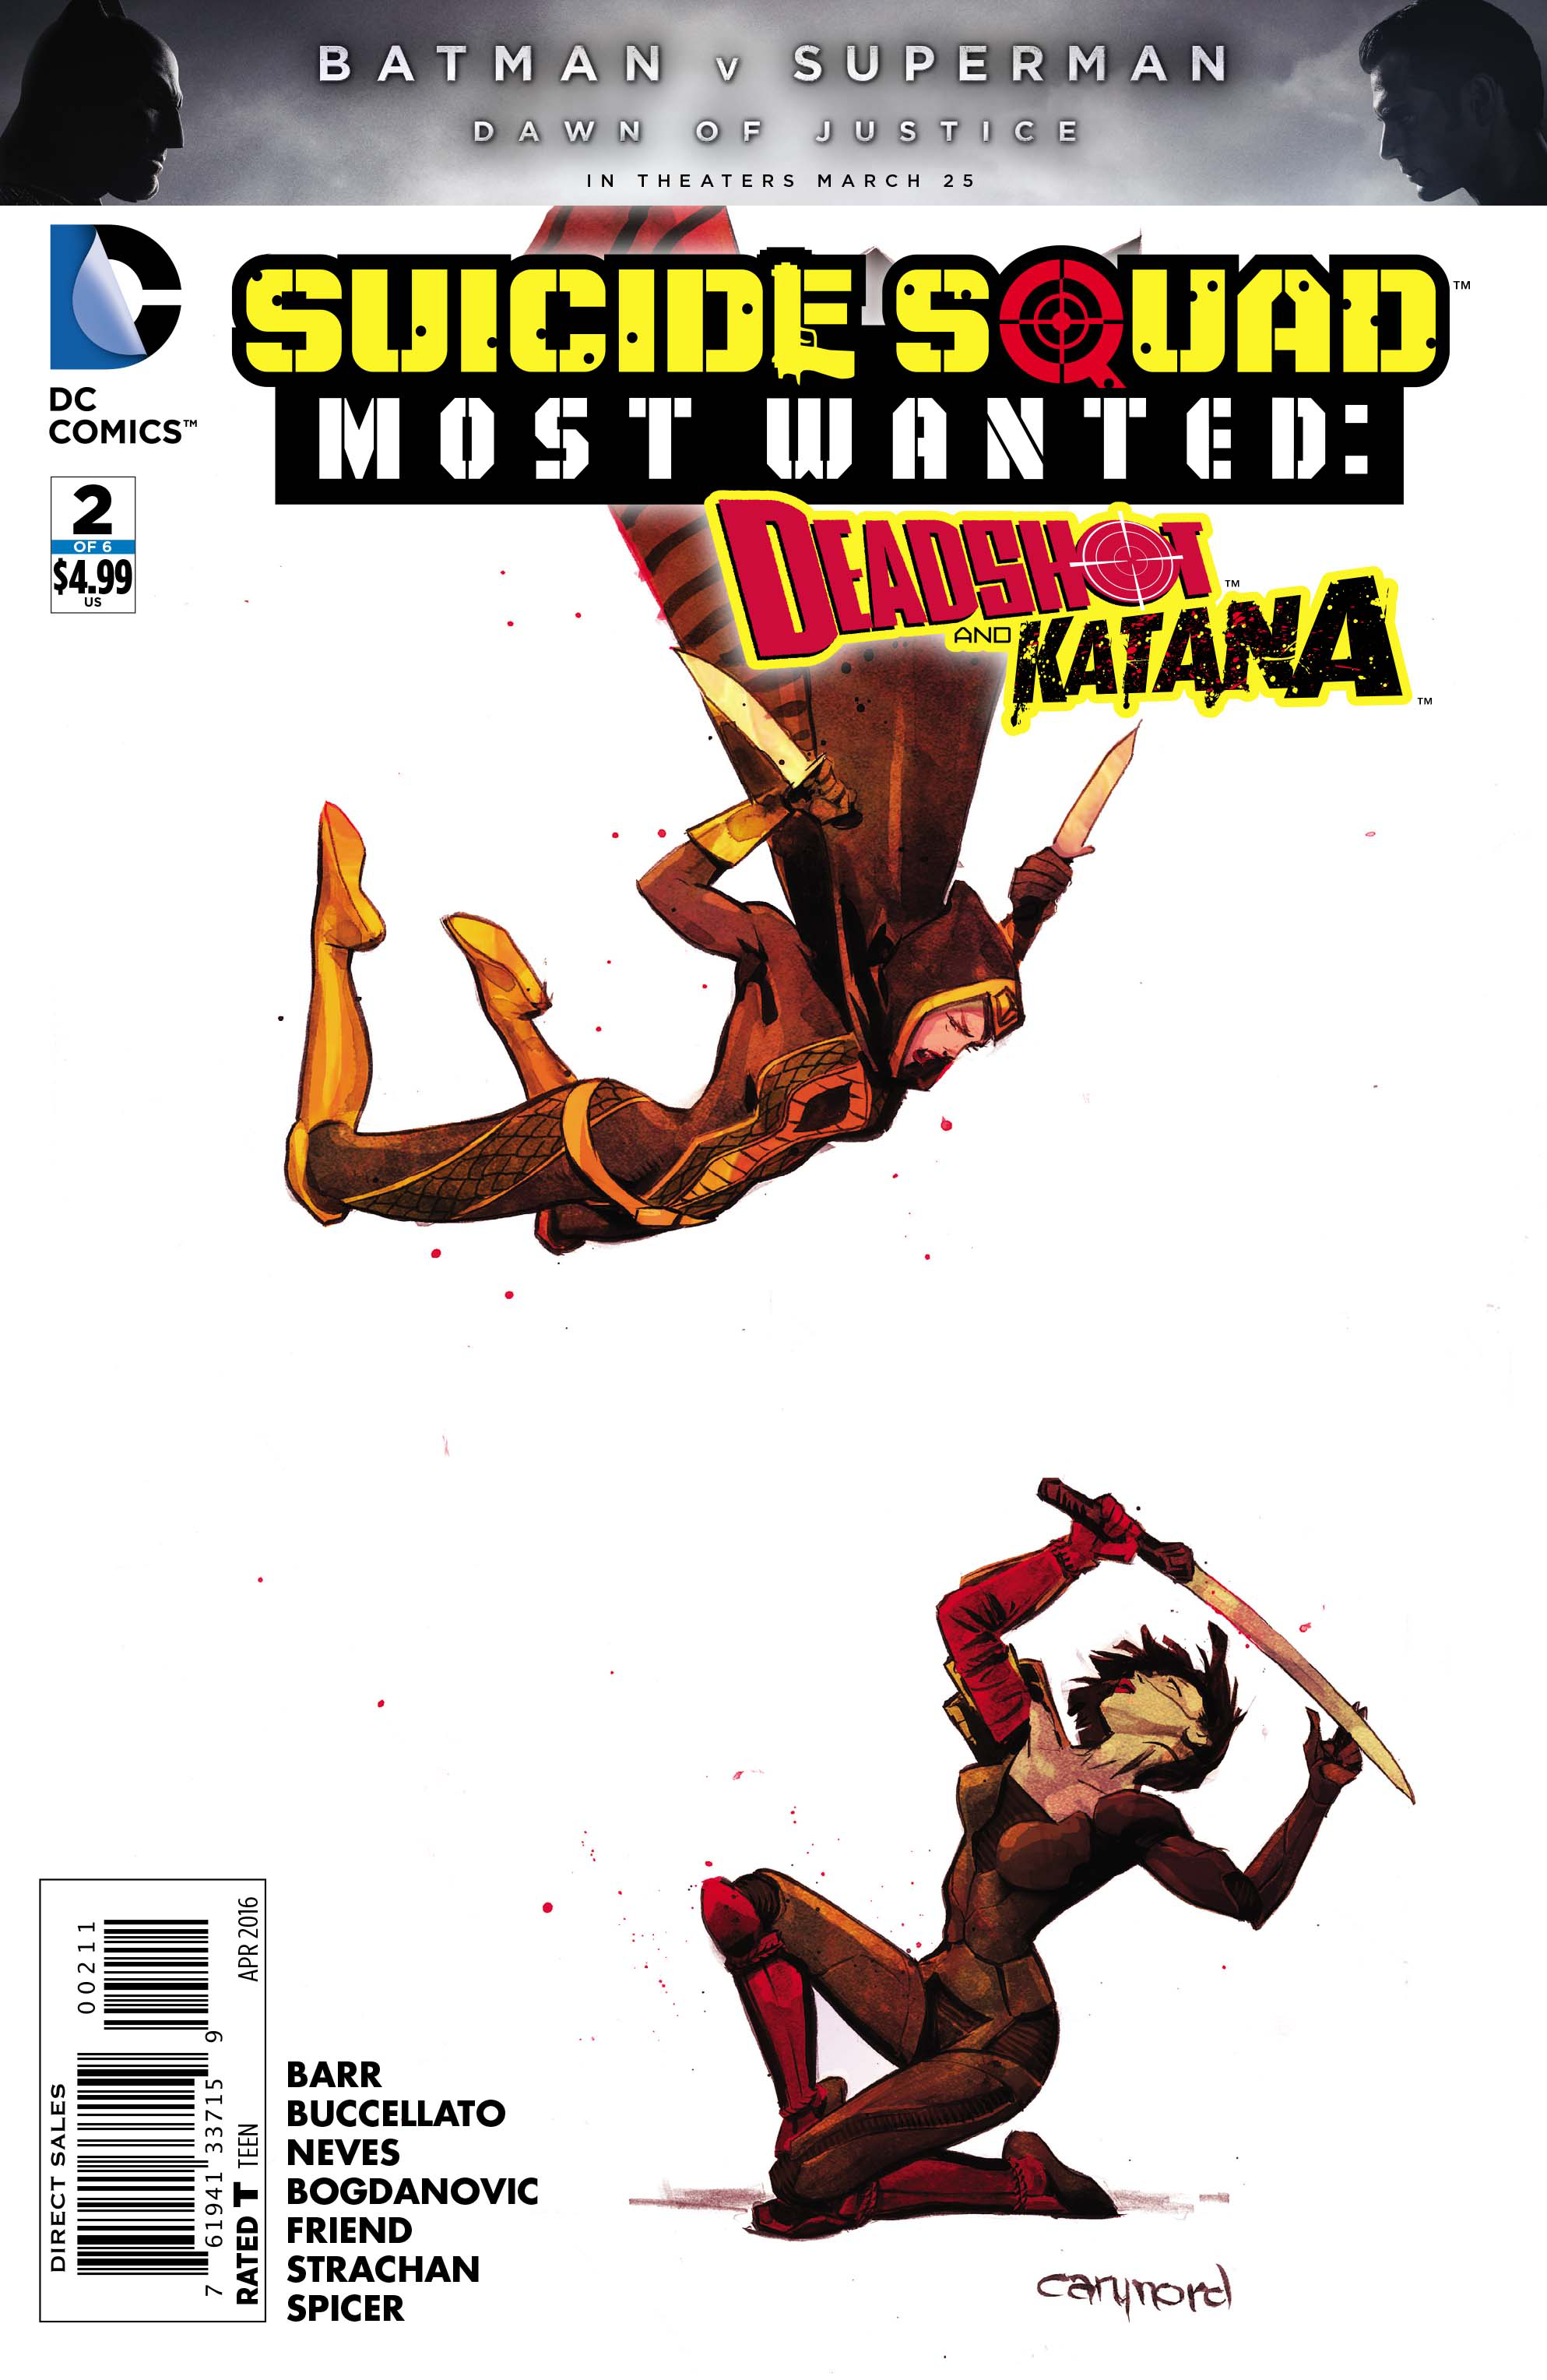 SUICIDE SQUAD MOST WANTED DEADSHOT KATANA #2 (OF 6)